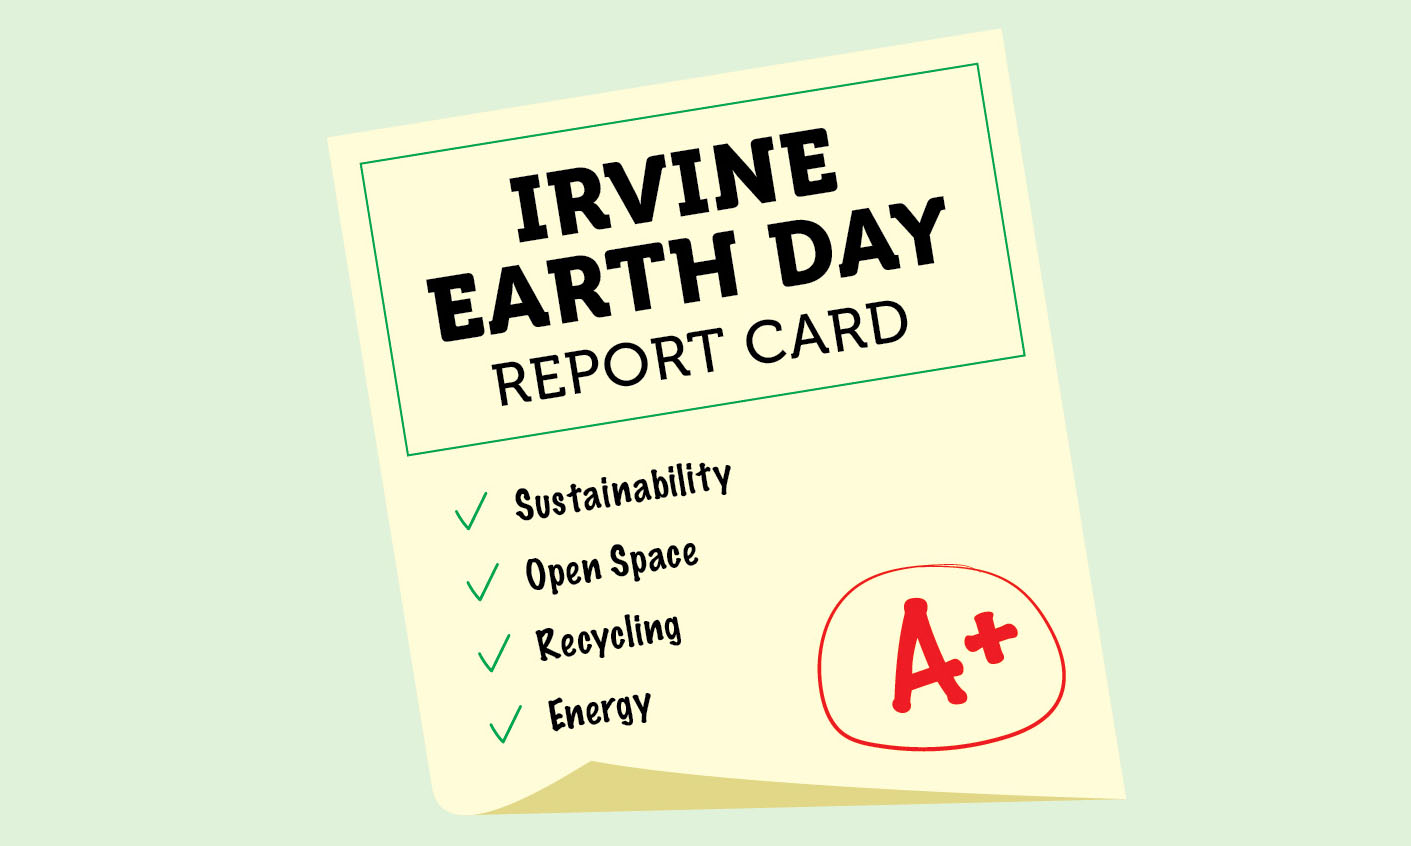 Irvine’s Earth Day report card: A+